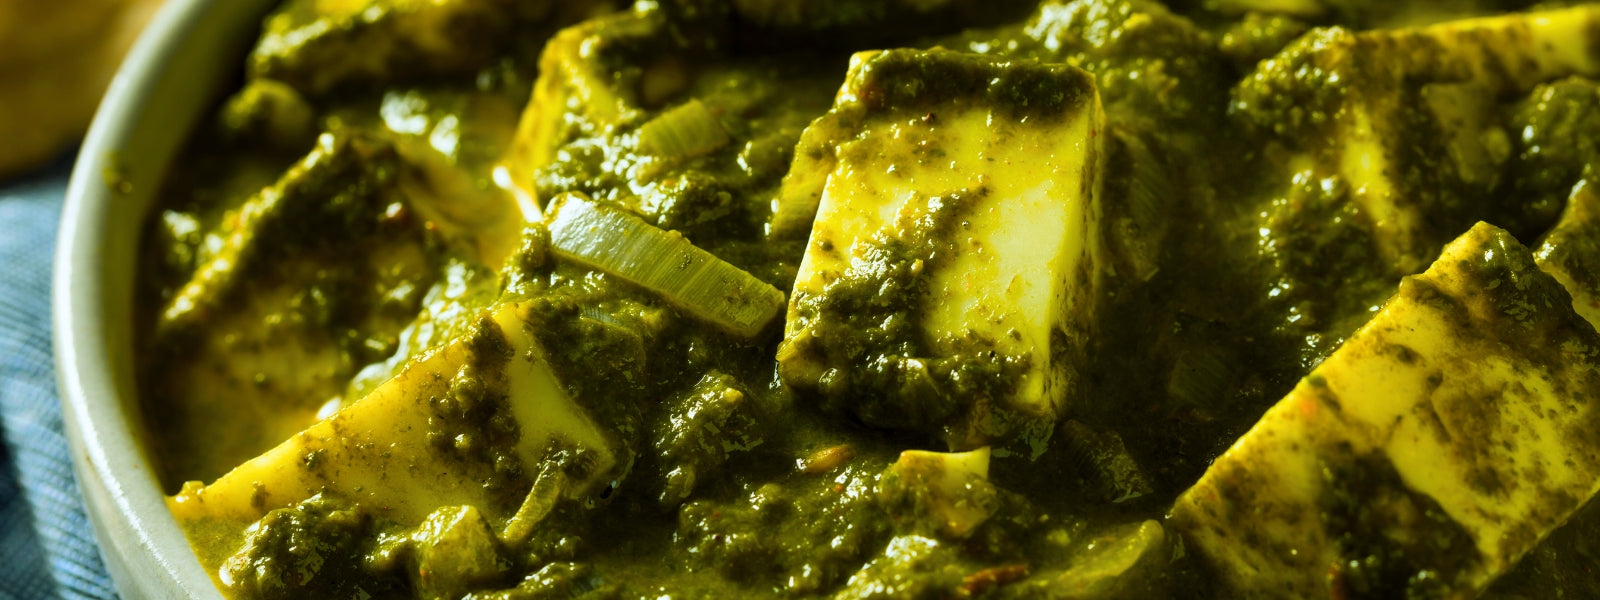 Microwave Palak Paneer: The Green Delight of India